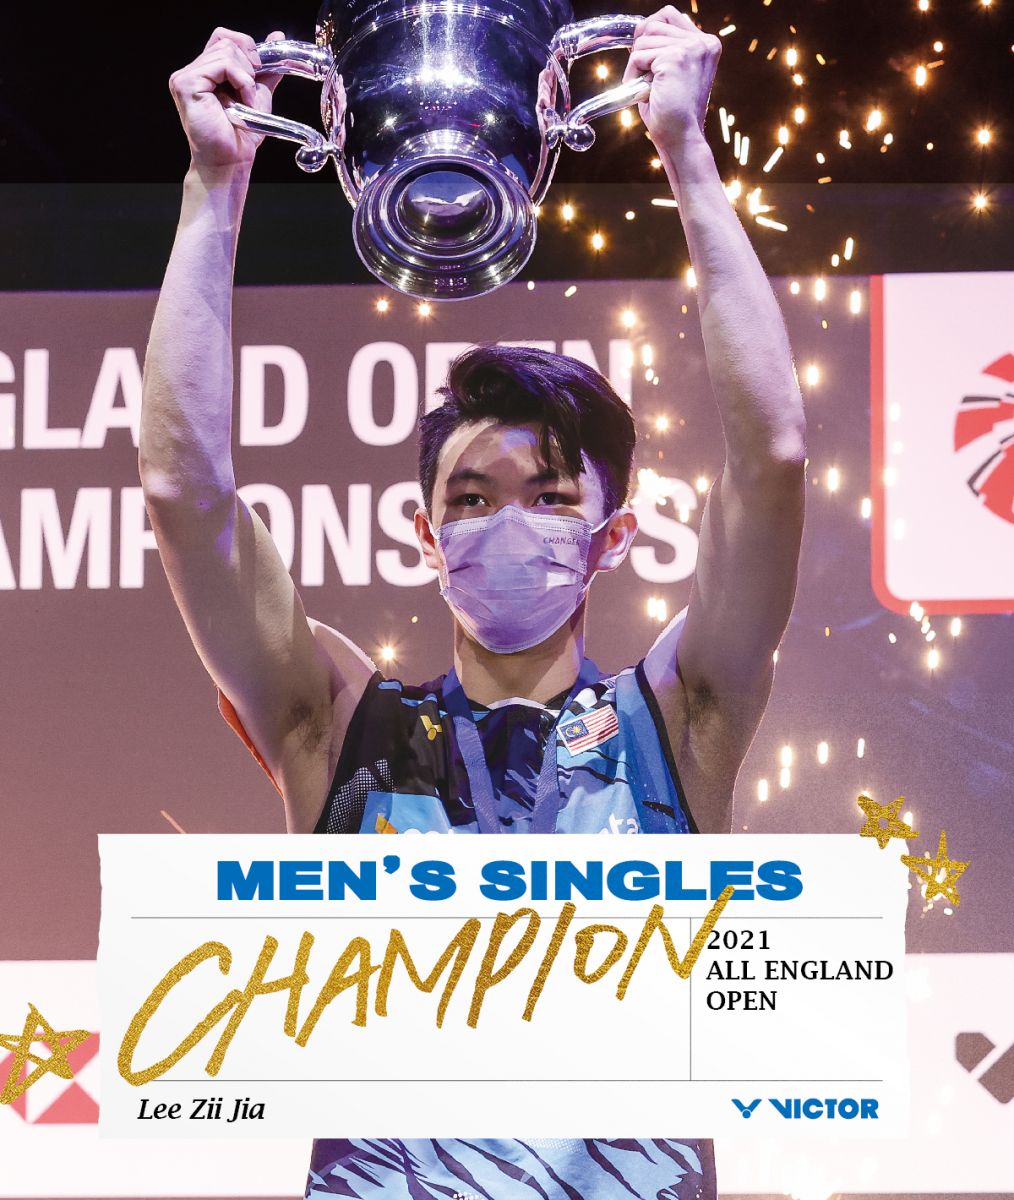 Lee Zii Jia lifts the All England Open trophy!